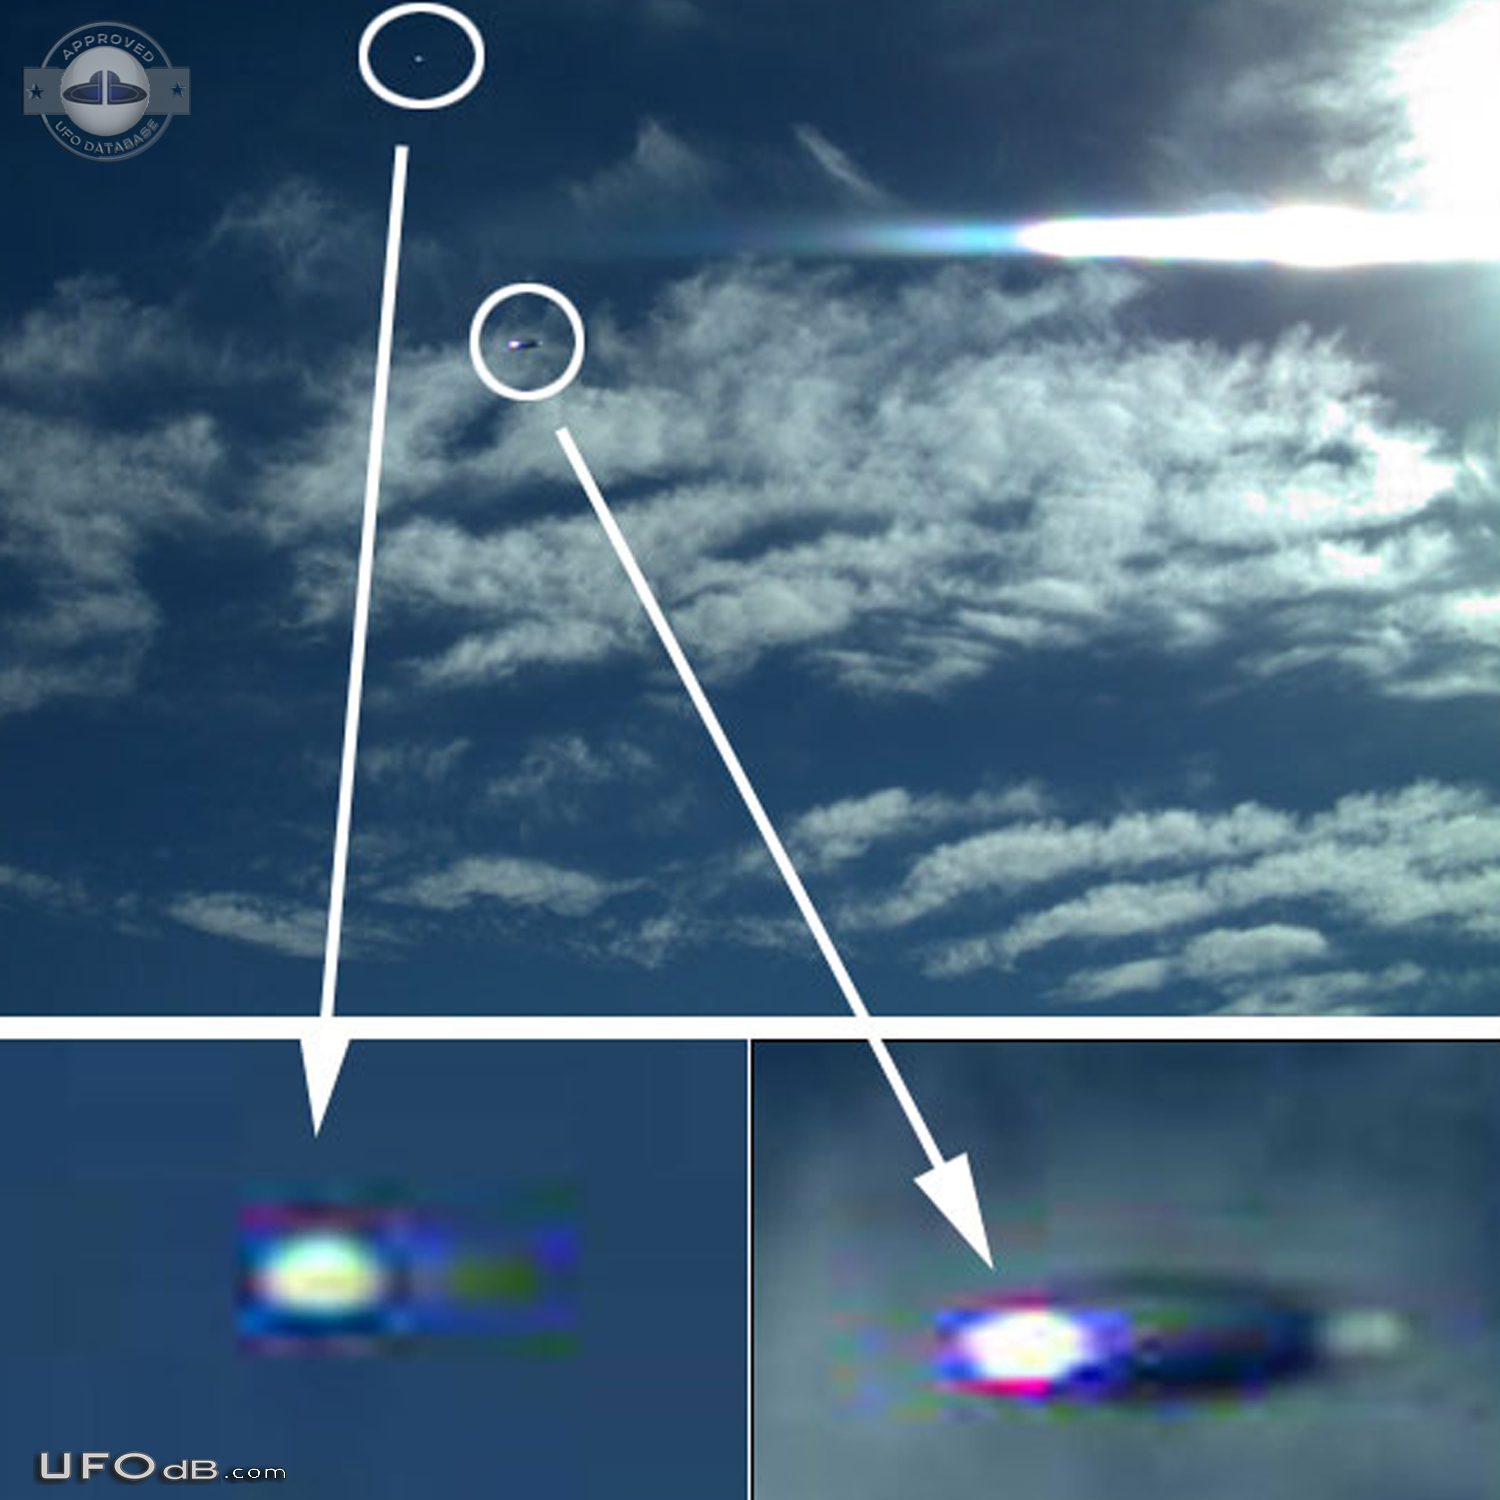 Trail Camera Captures UFOs in the Eastern Sky - Clancy Montana USA 201 UFO Picture #765-3